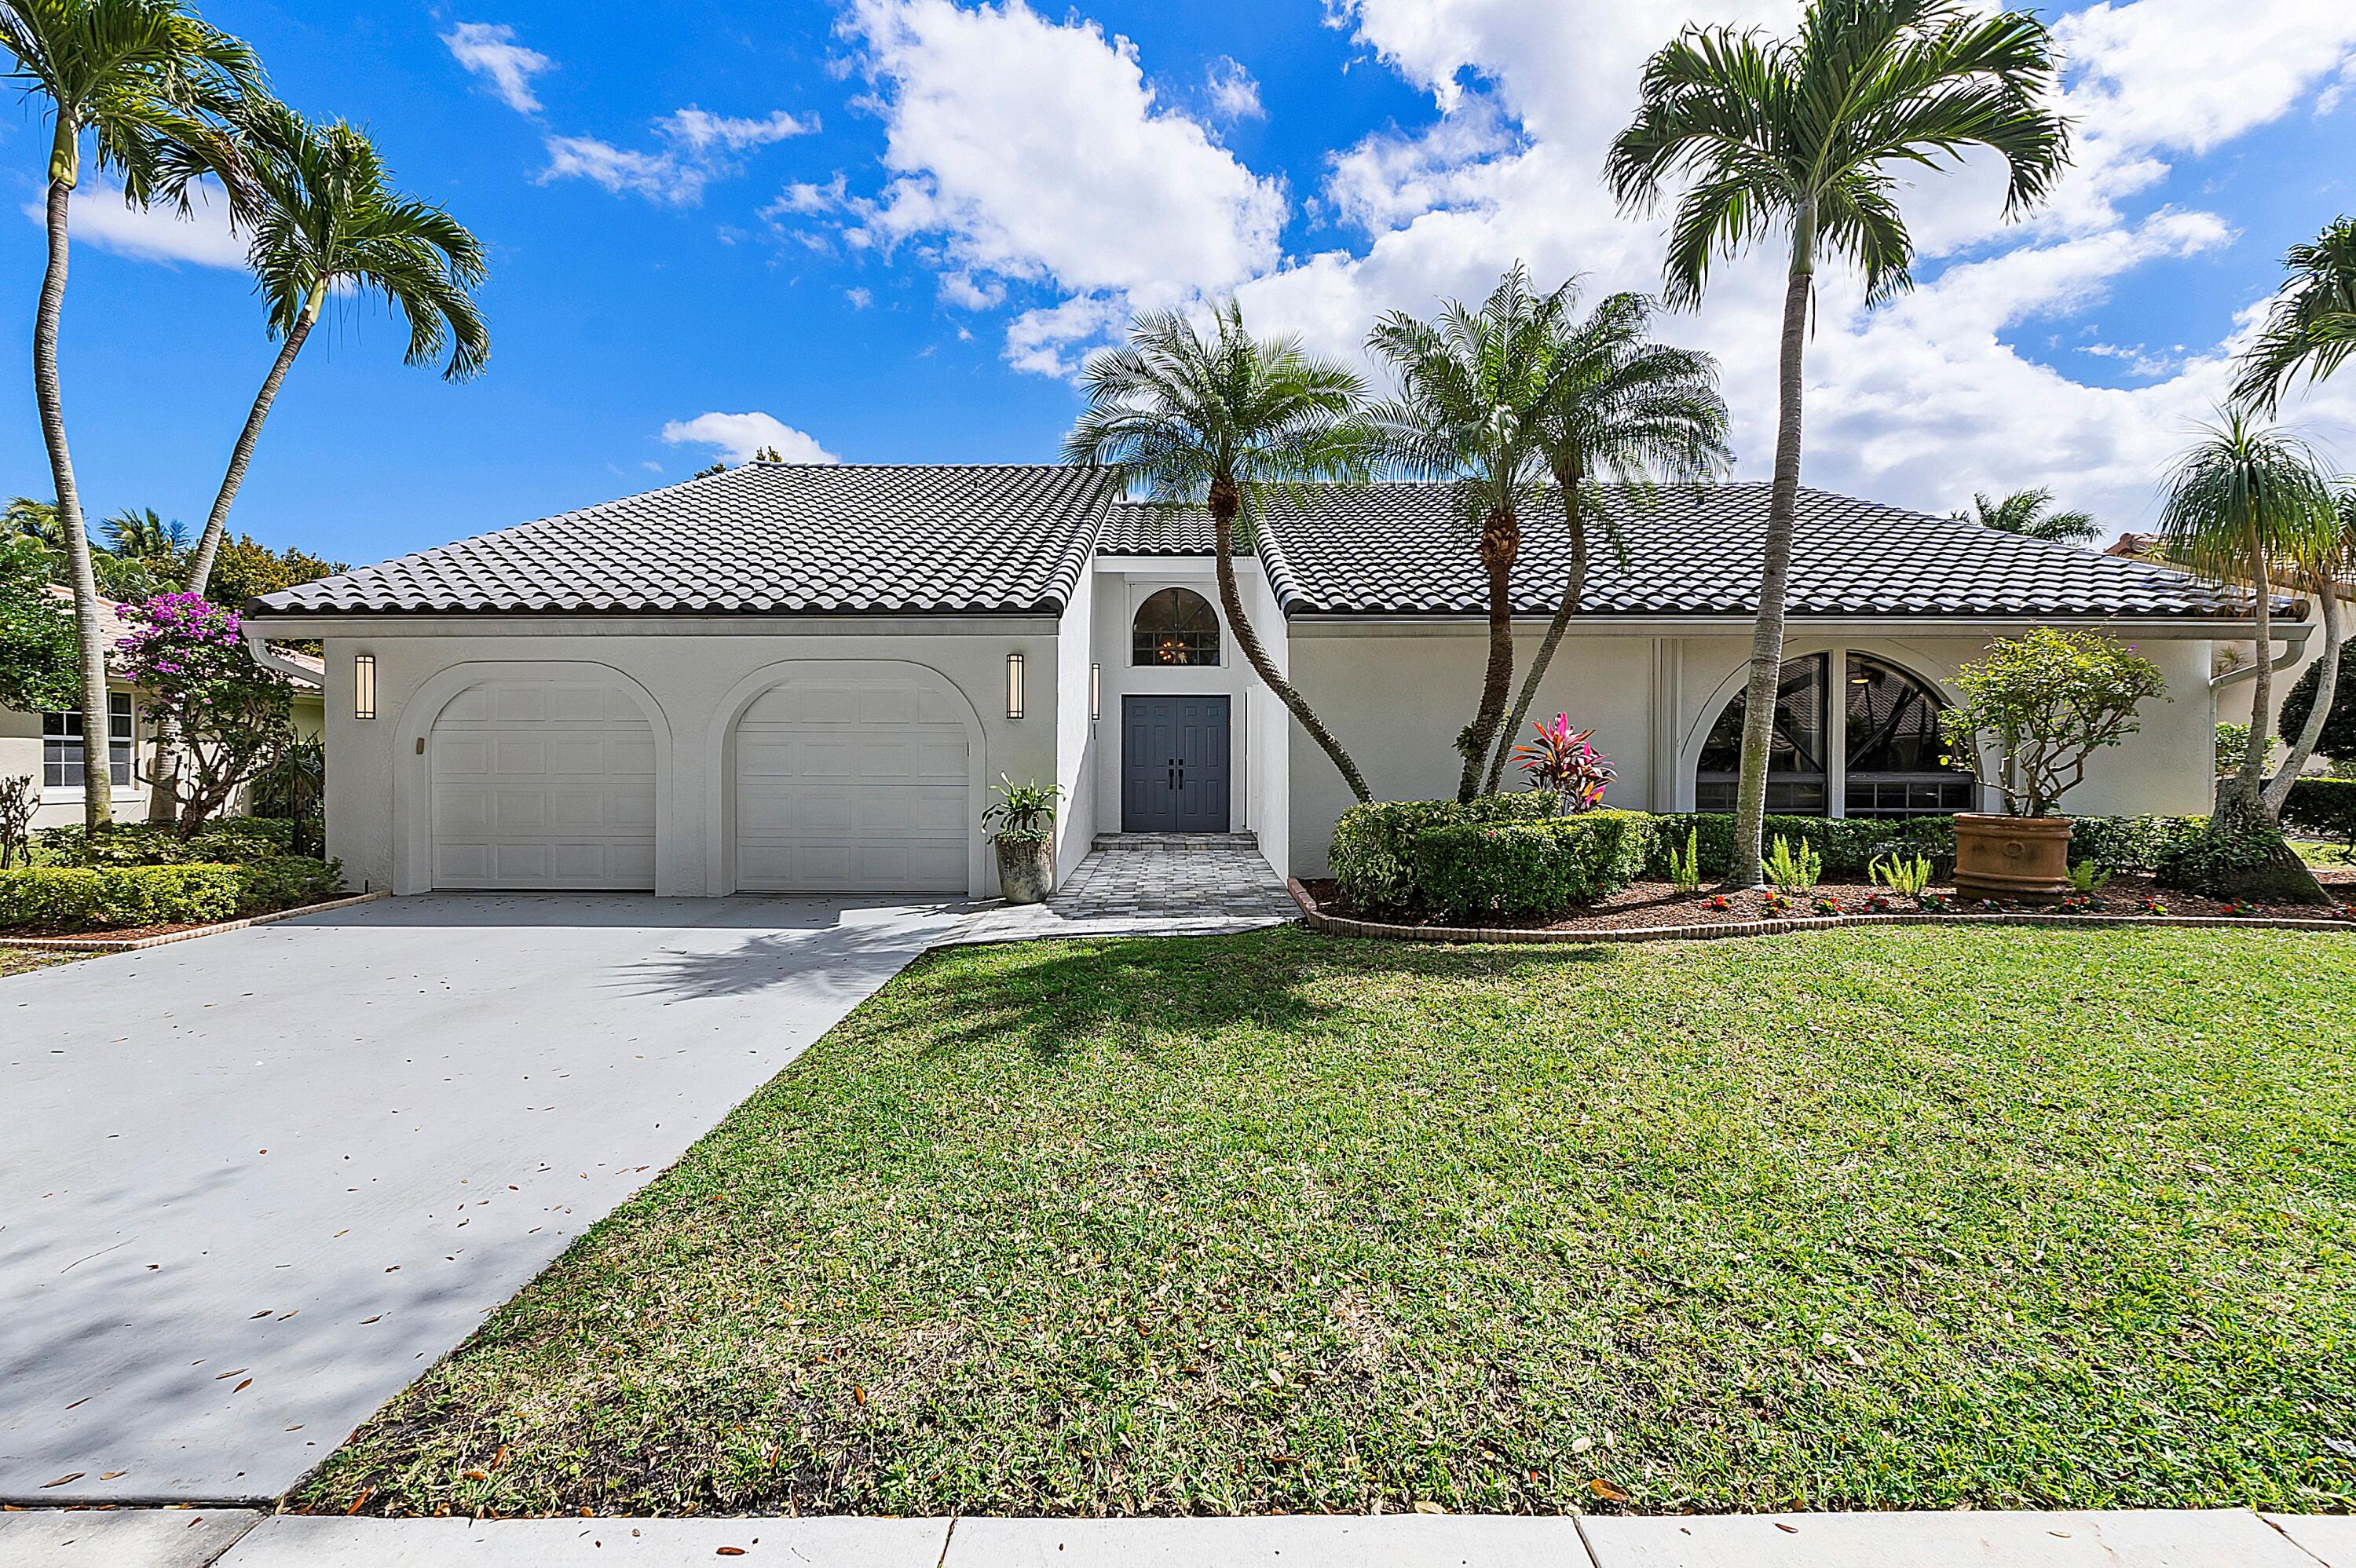 Property for Sale at 2712 Nw 27th Terrace, Boca Raton, Palm Beach County, Florida - Bedrooms: 4 
Bathrooms: 2.5  - $1,375,000